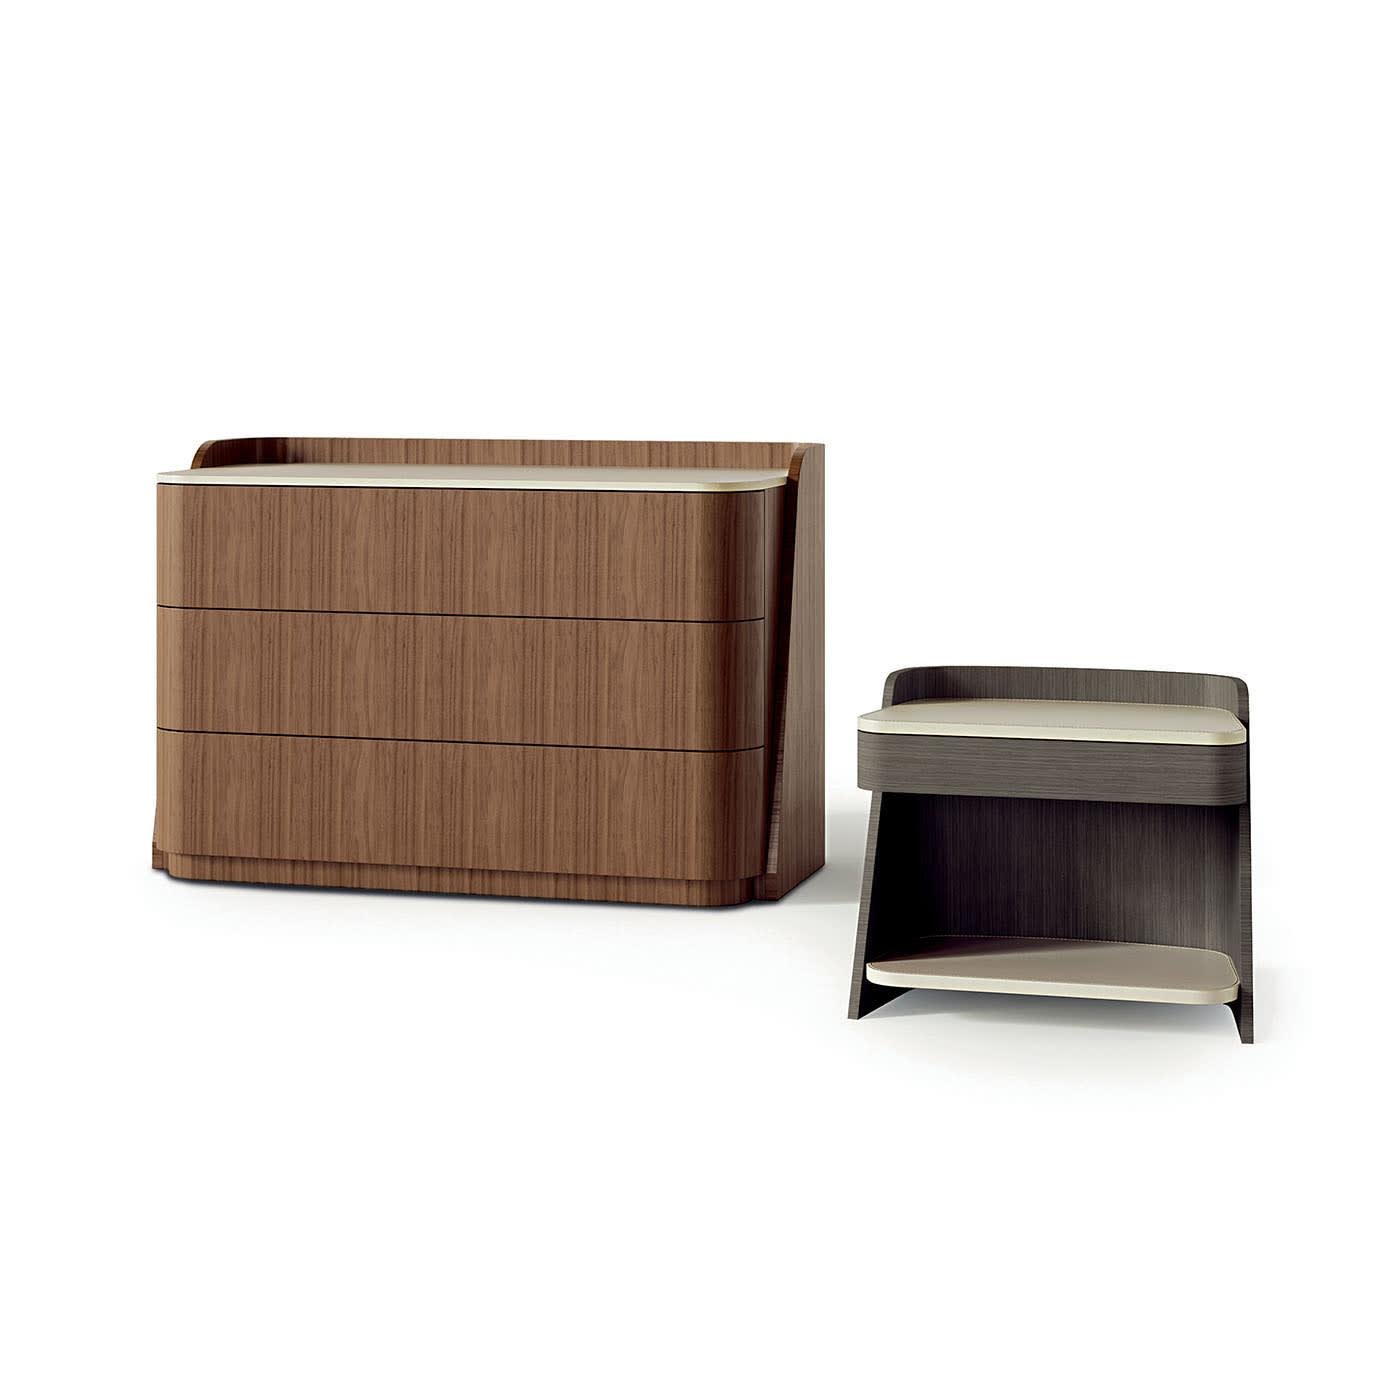 Chest of drawers from the Shape line covered in Canaletto Walnut. Equipped with three large push and pull drawers and slow motion system with a leather interior. Top covered in leather.